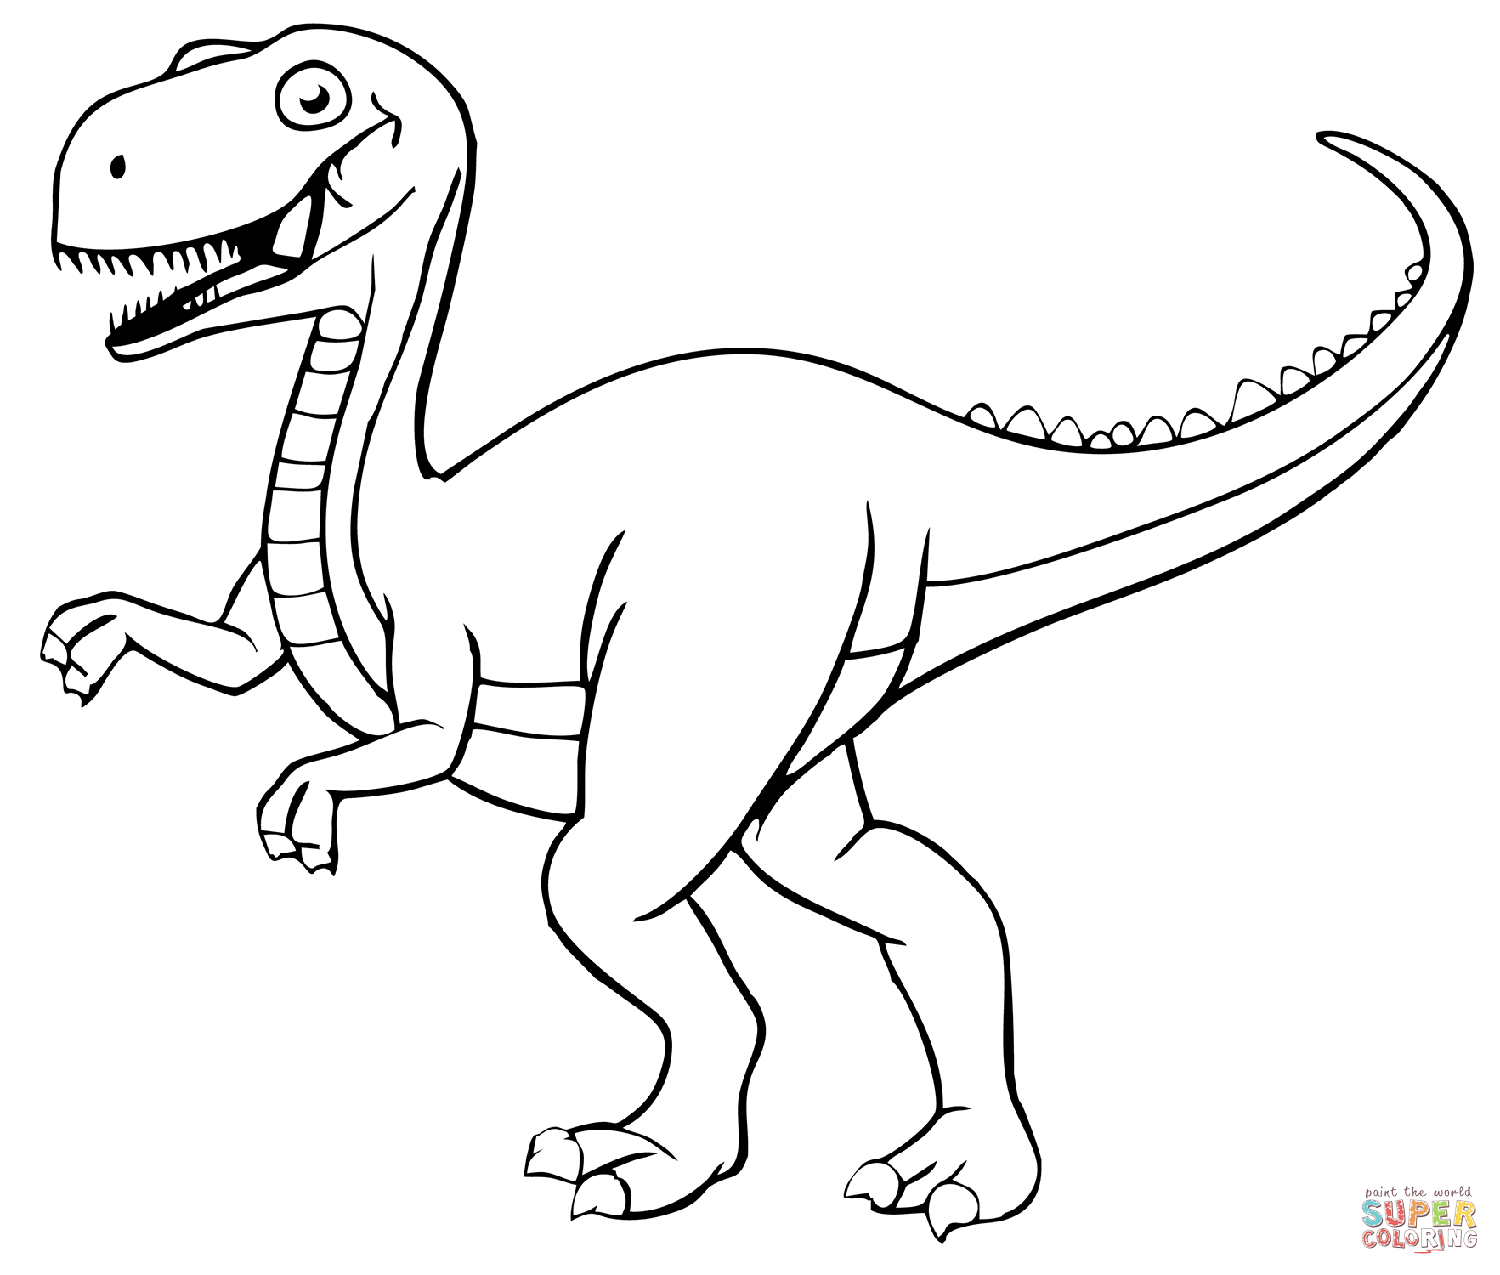 Dinosaur coloring page free printable coloring pages